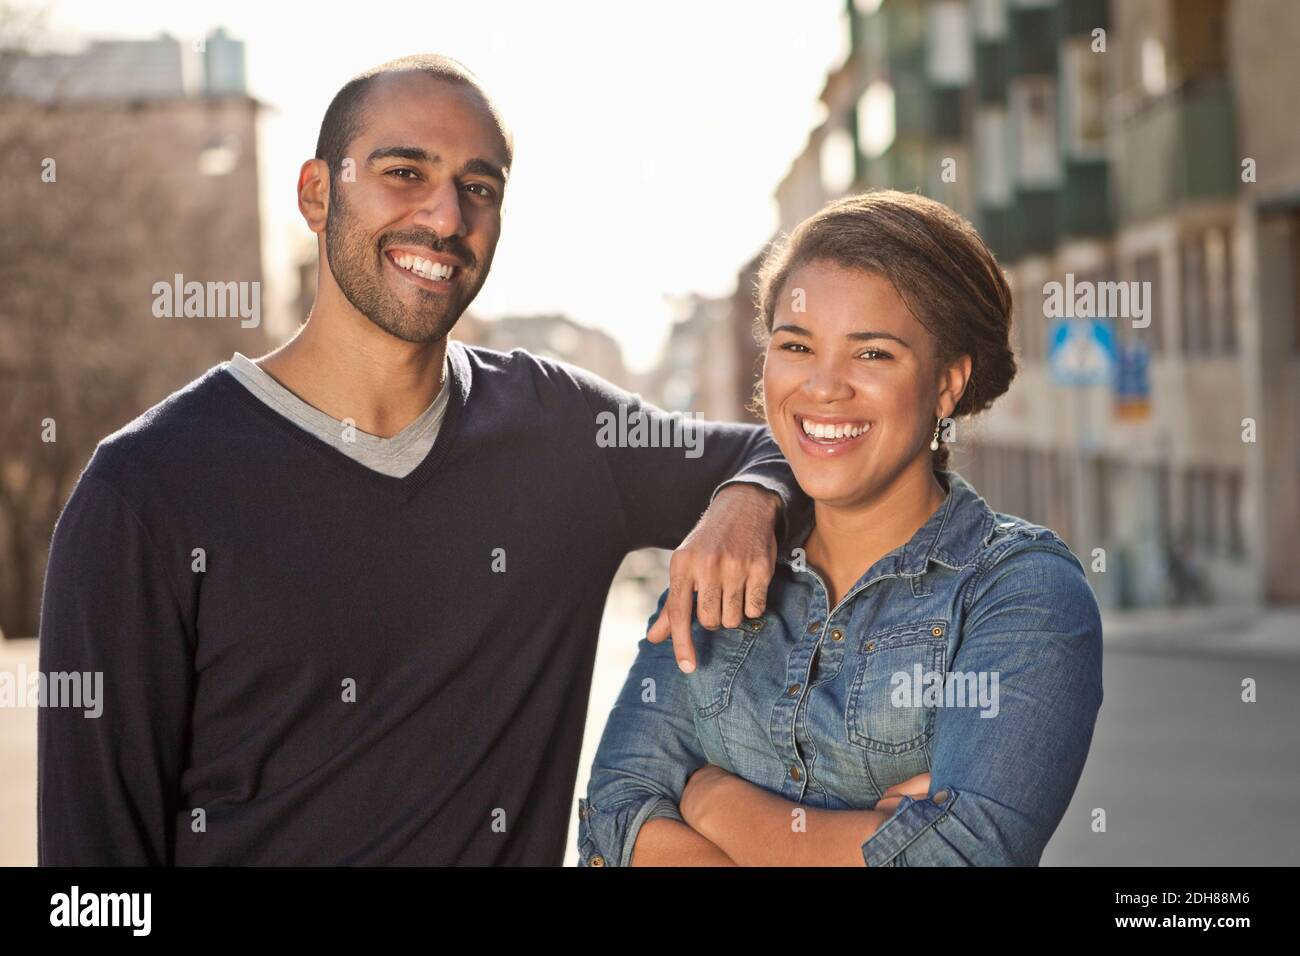 Front view portrait of male friend with arm on female's shoulder Stock Photo